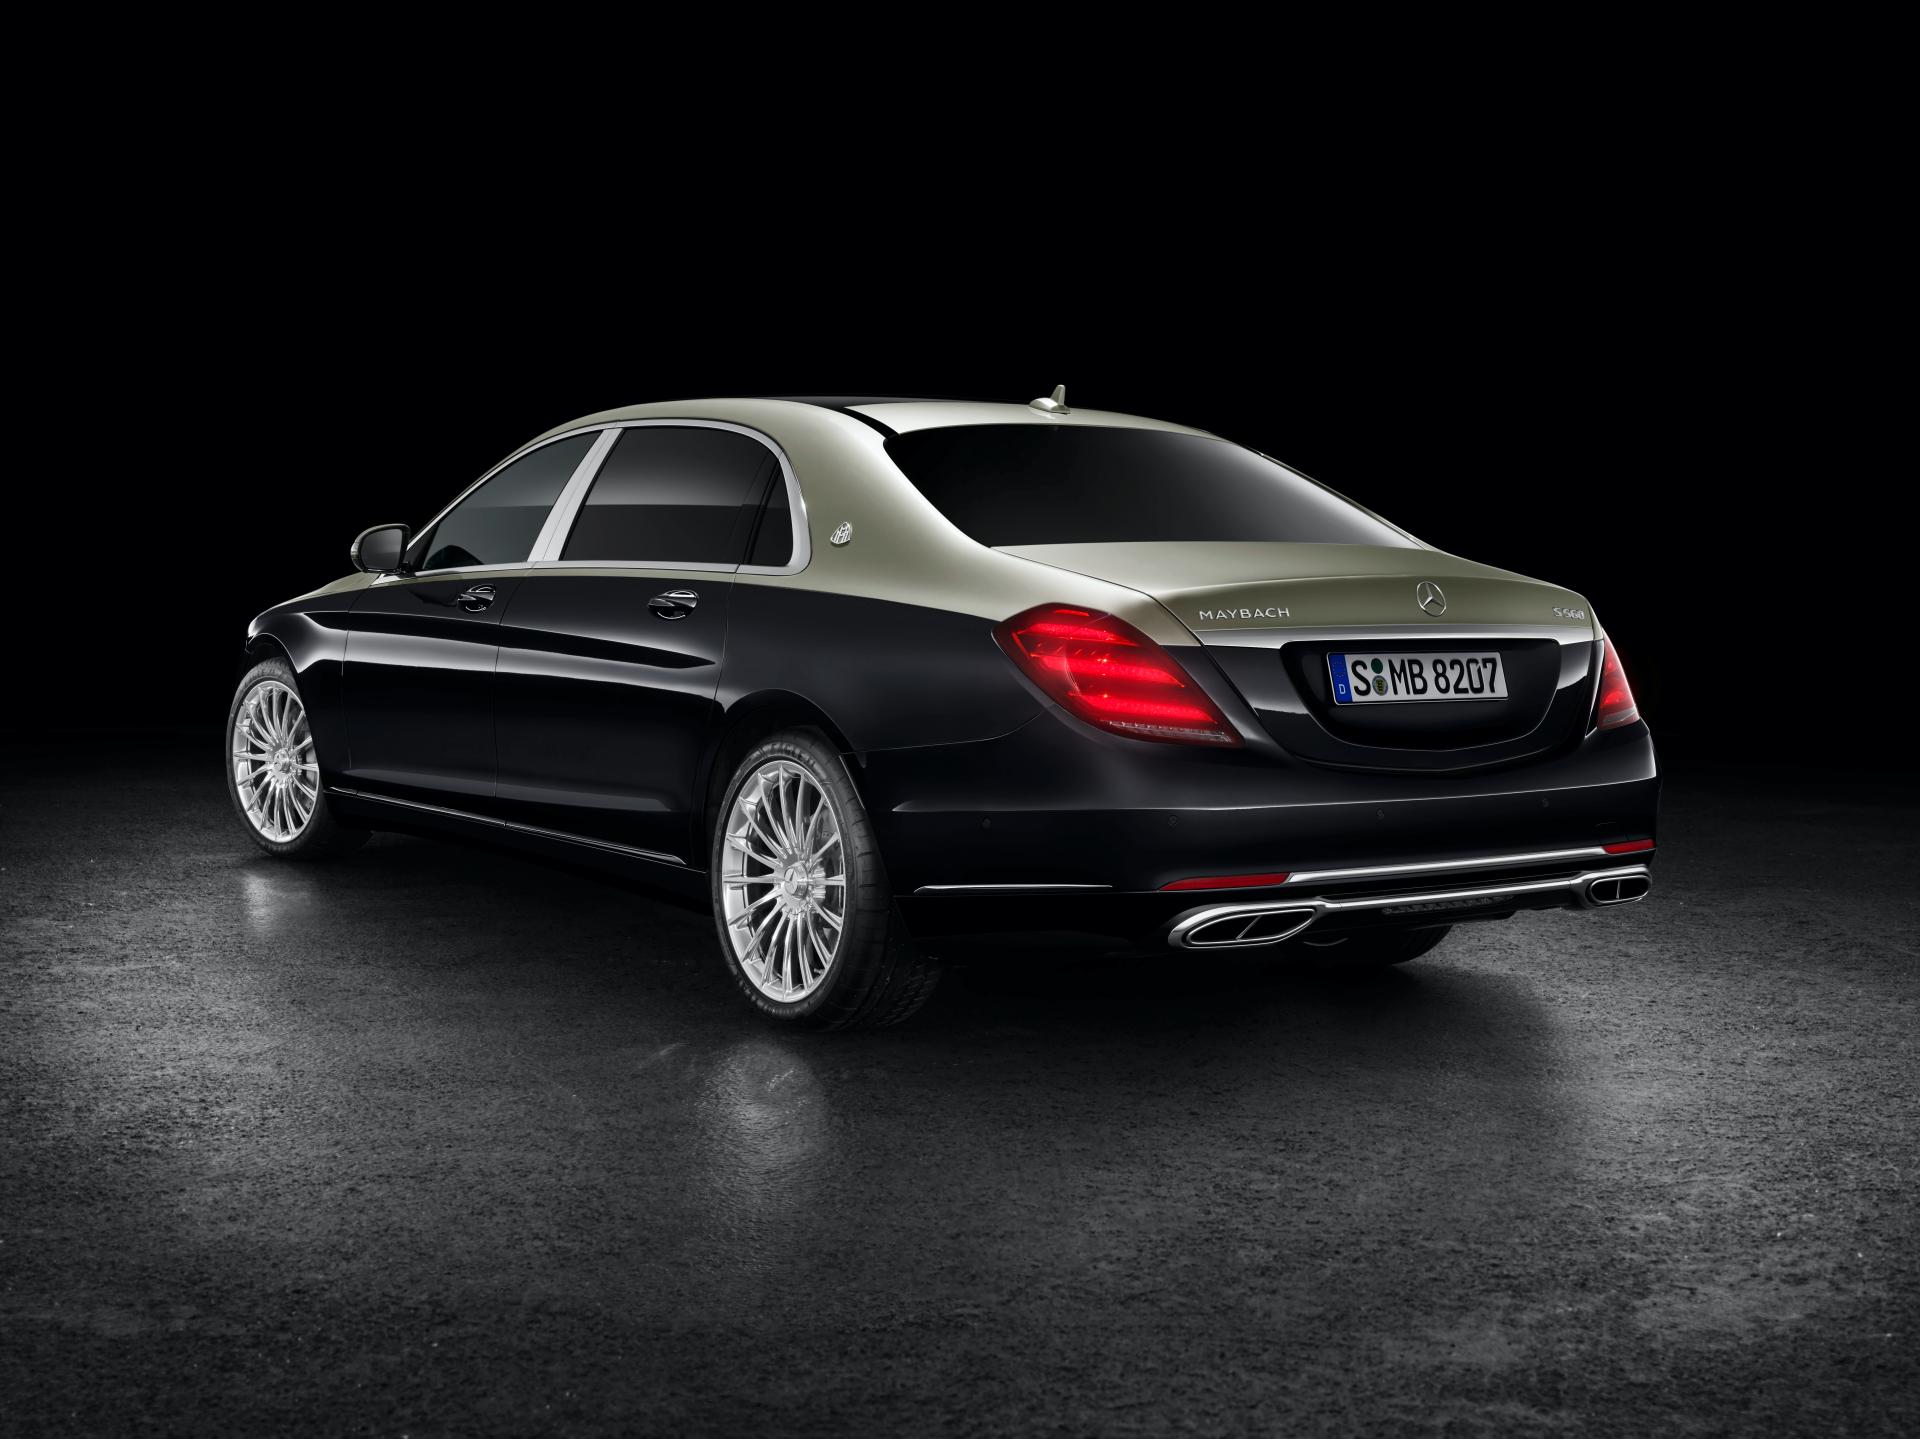 Mercedes Has Built 500 000 Current Generation S Class Sedans One In